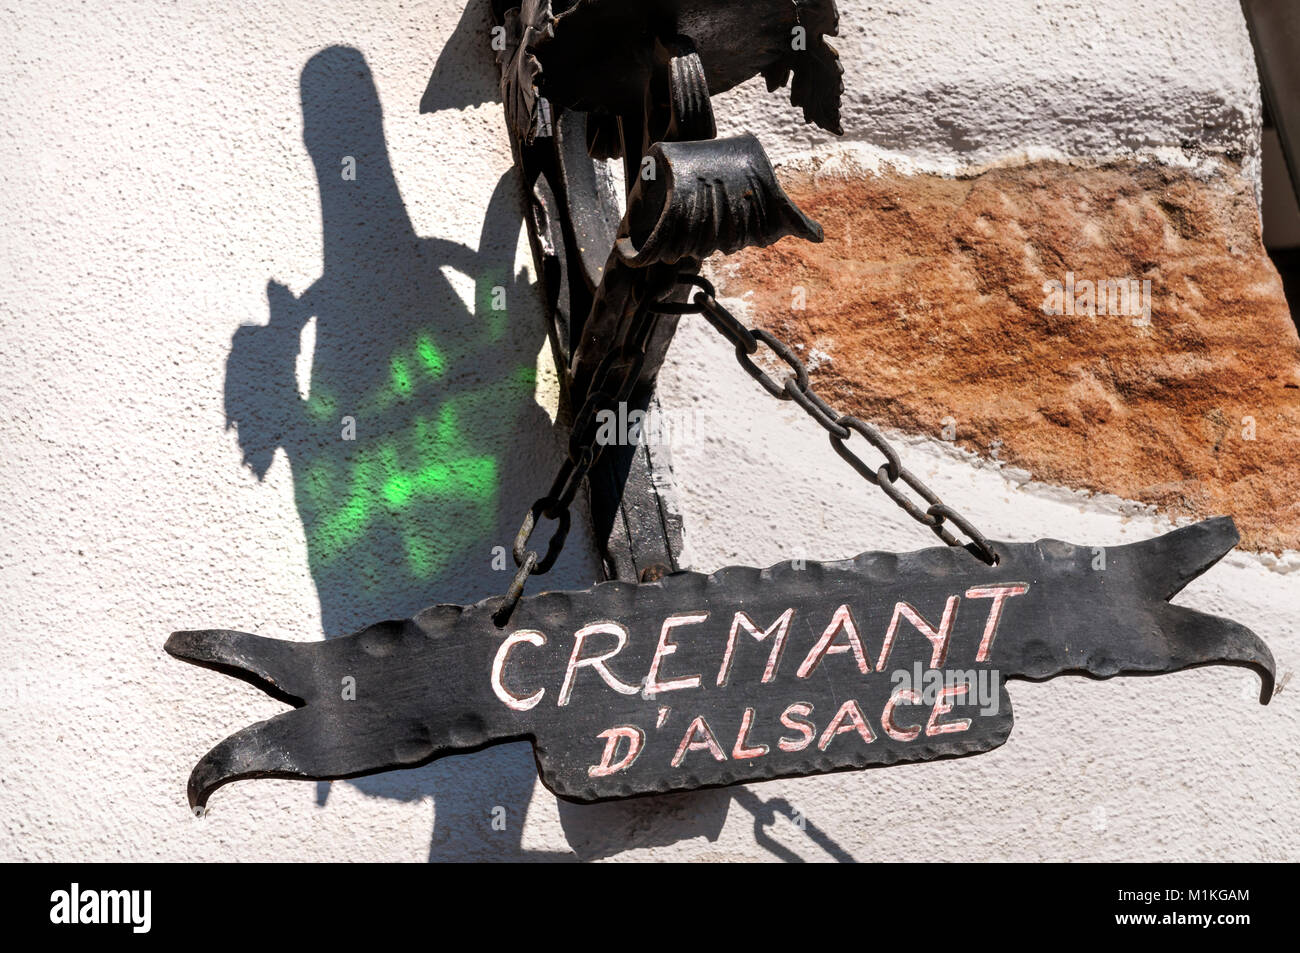 'Cremant d'Alsace' bottle silhouette and rustic ornate signage of local sparkling wine speciality at entrance to winery in Kaysersberg Alsace France Stock Photo